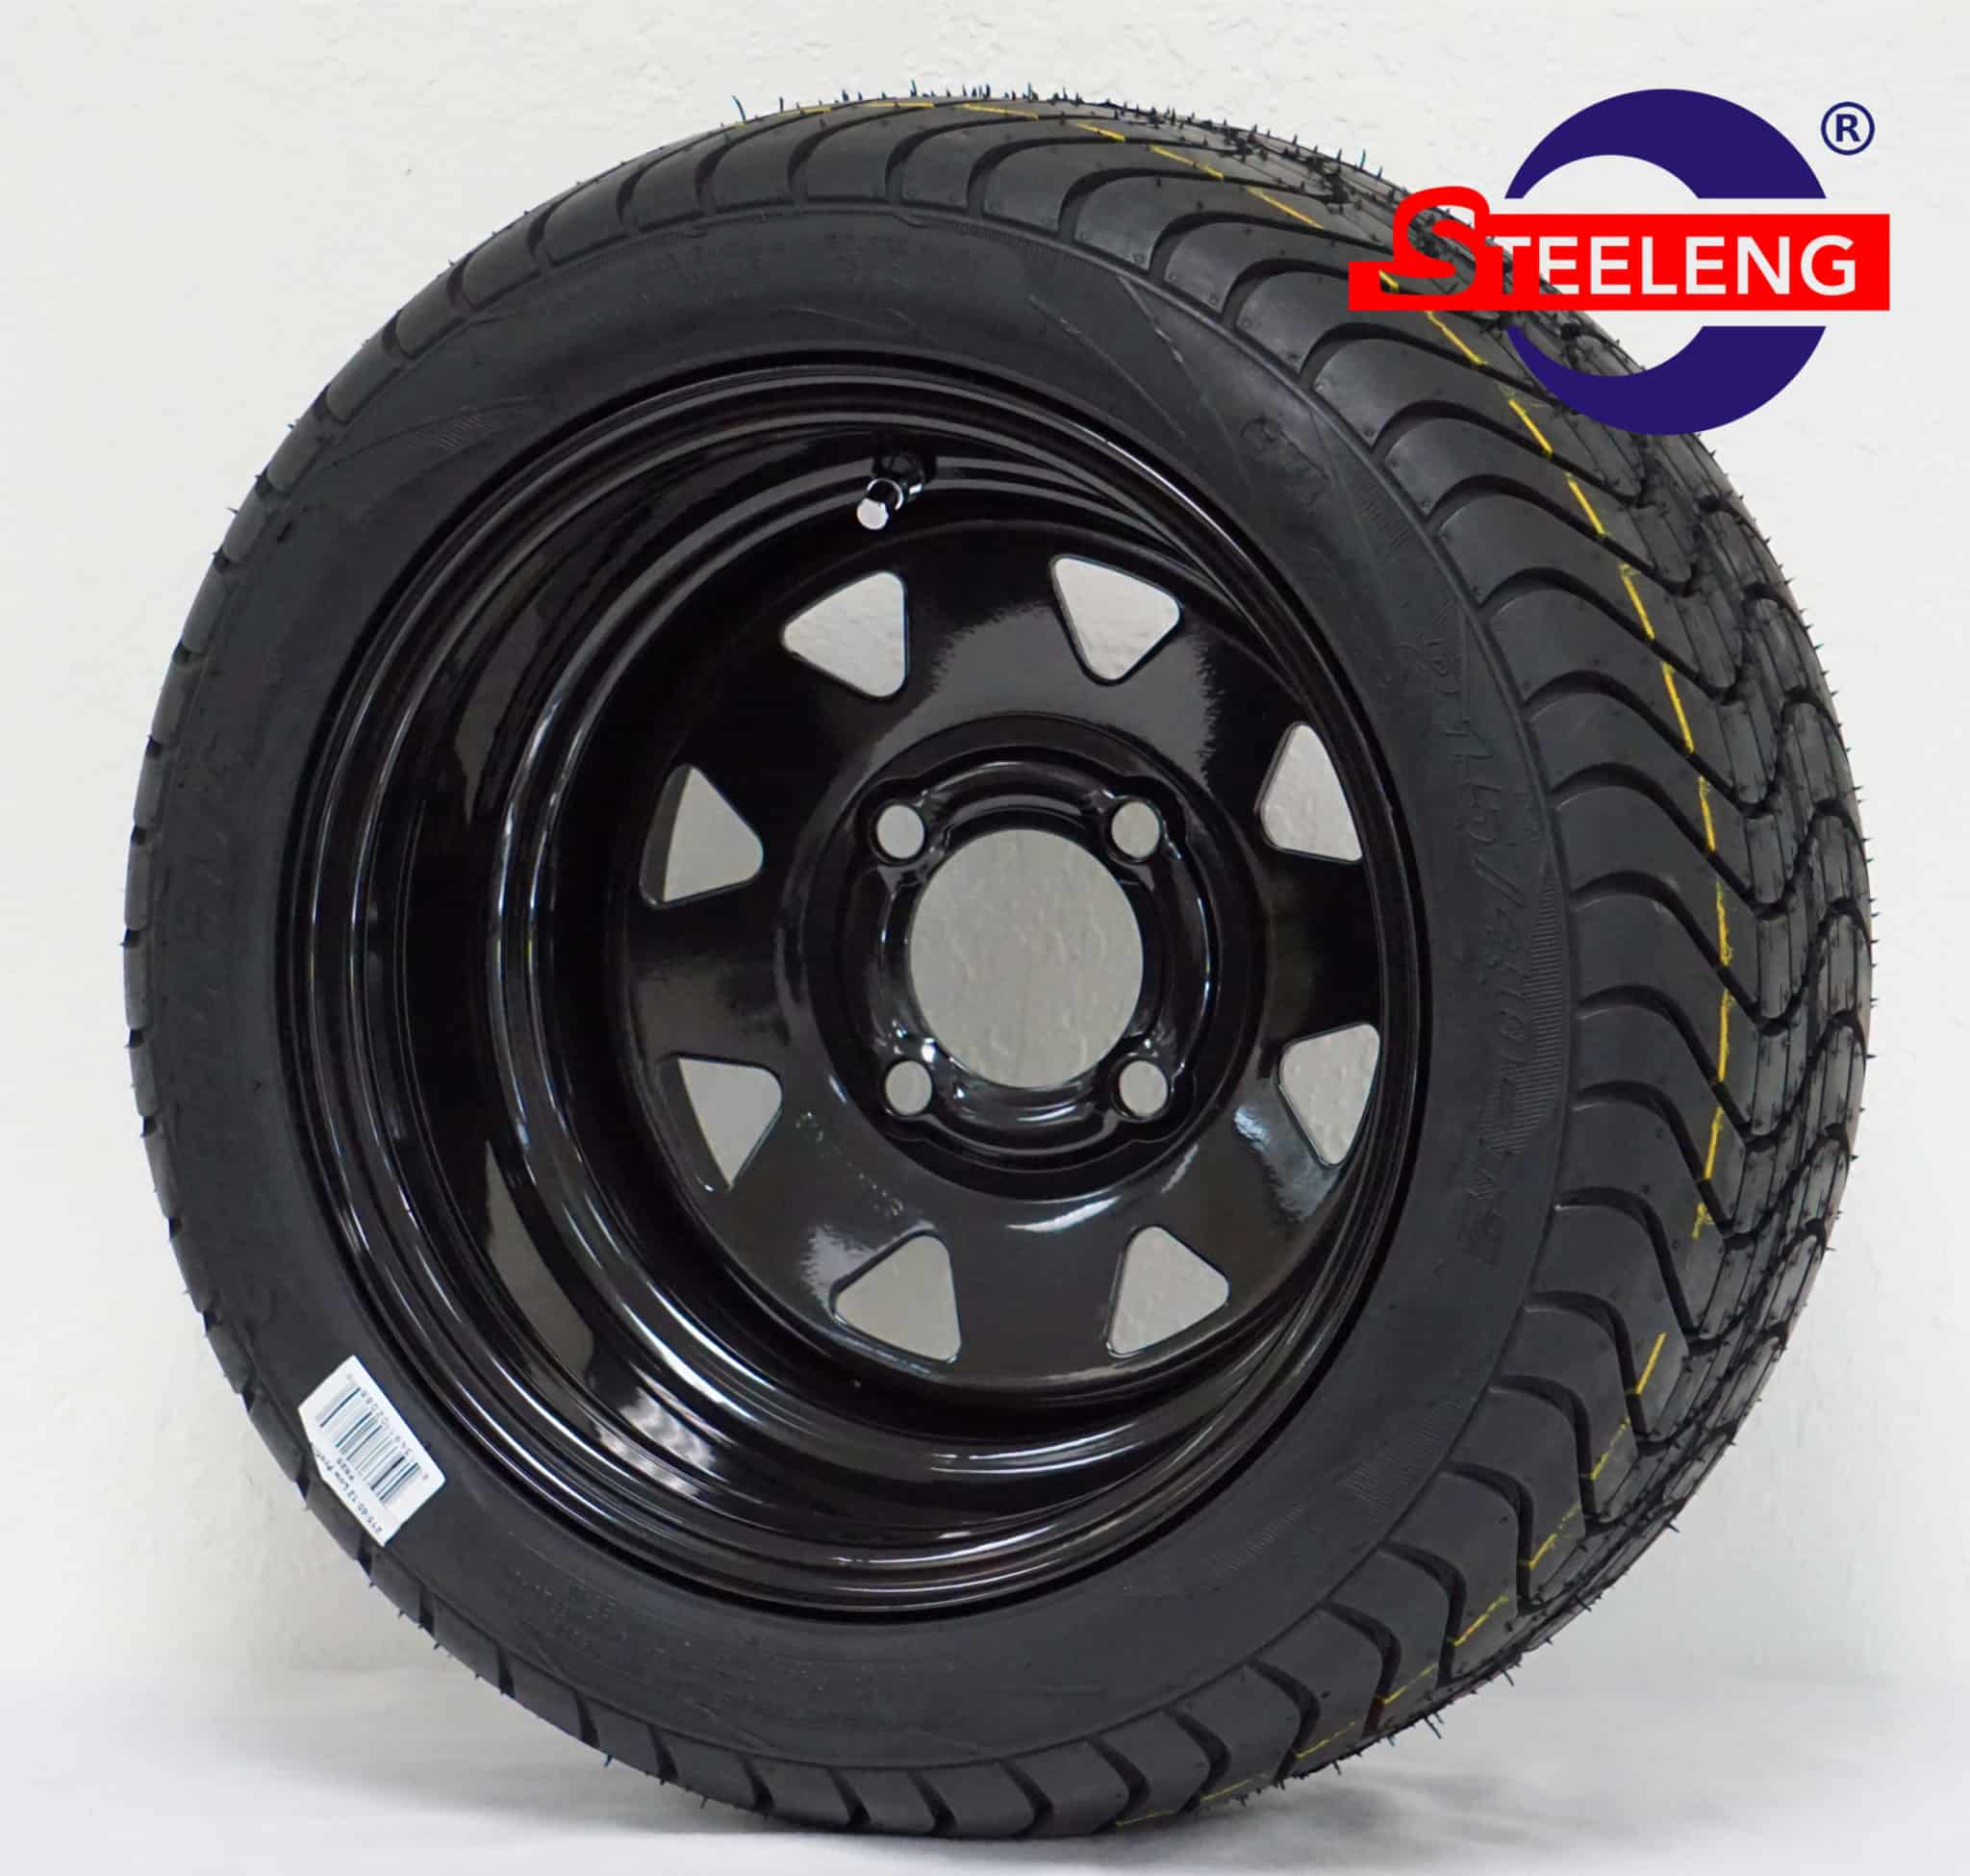 BNDL-SW1201-TR1211 12" x 7" Black Slotted Steel Wheel & 215/40-12 Low Profile Tire DOT Approved Set of 4